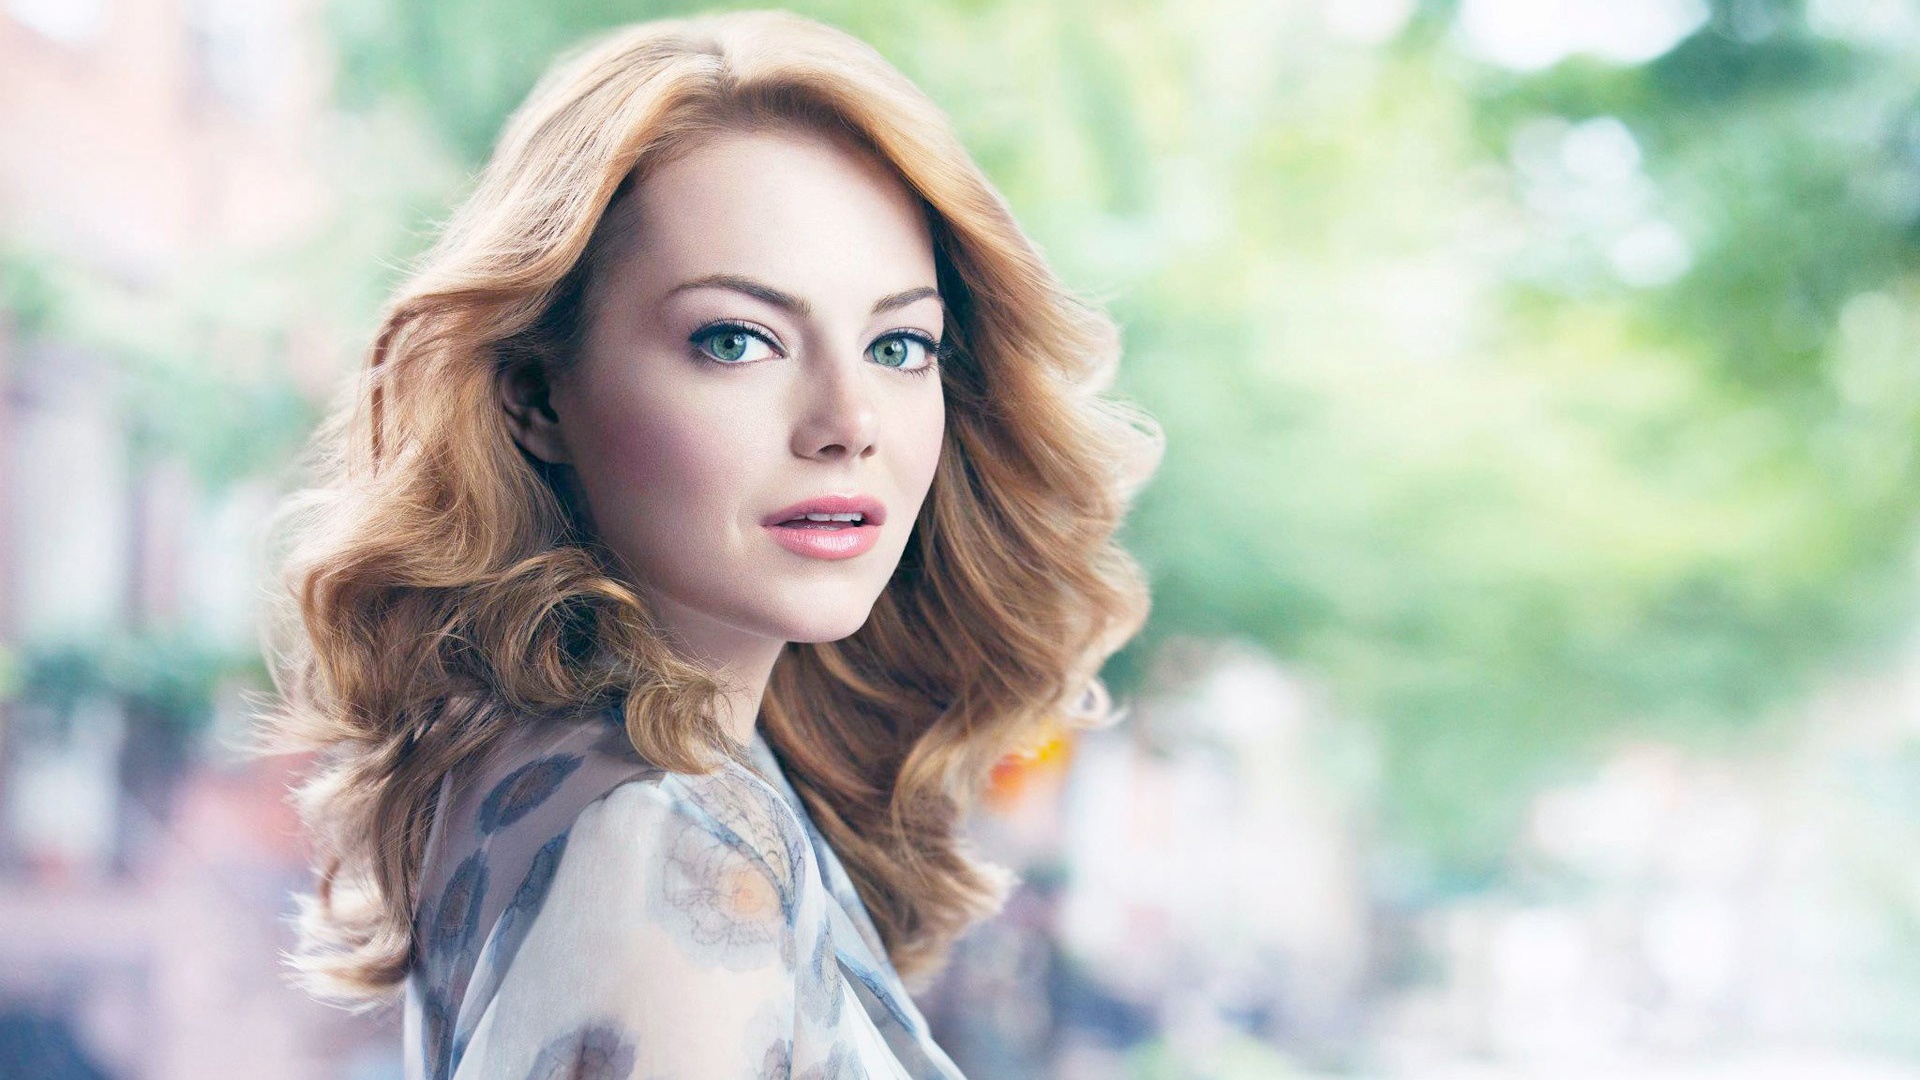 free emma stone beautiful side look face pose mobile background download pictures hd